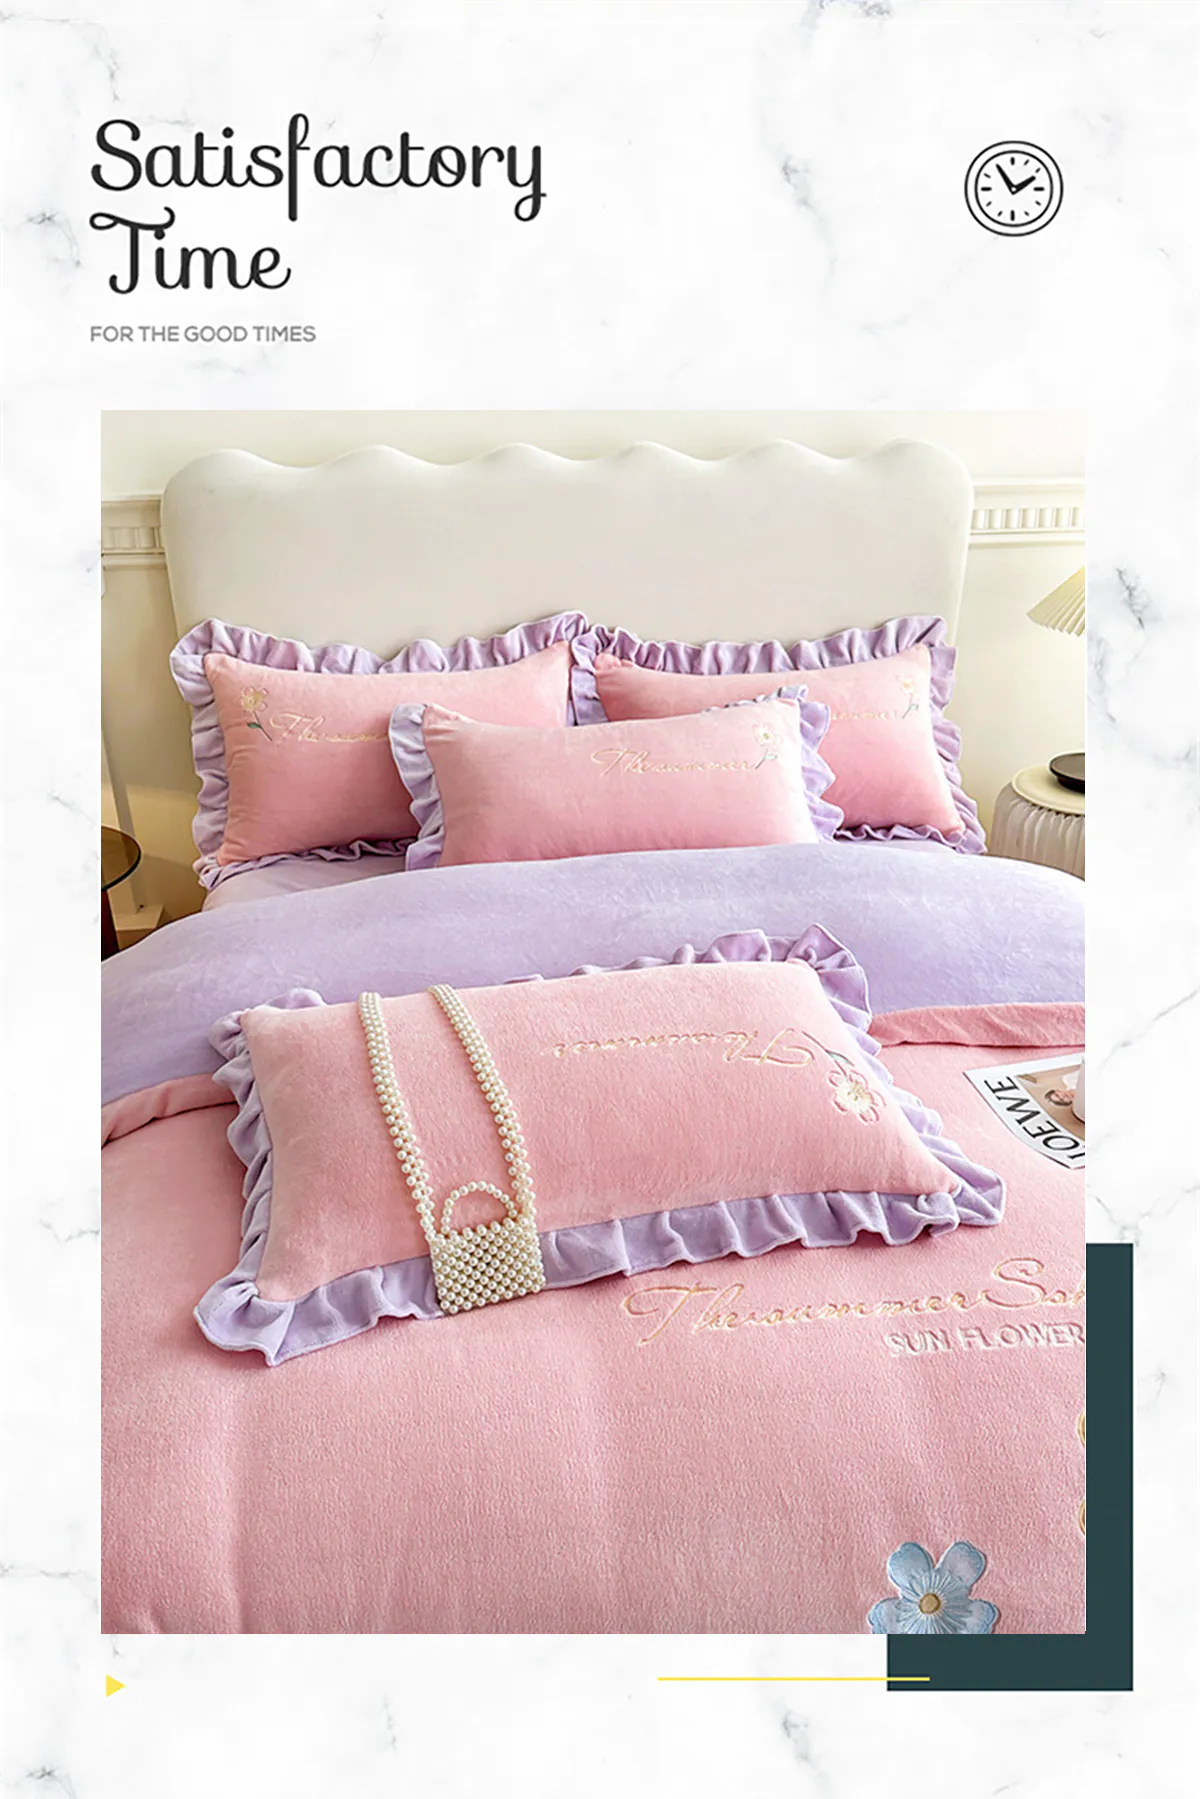 Comfy-Milk-Fiber-Embroidery-Quilt-Cover-Bed-Sheet-Pillowcases-Set21